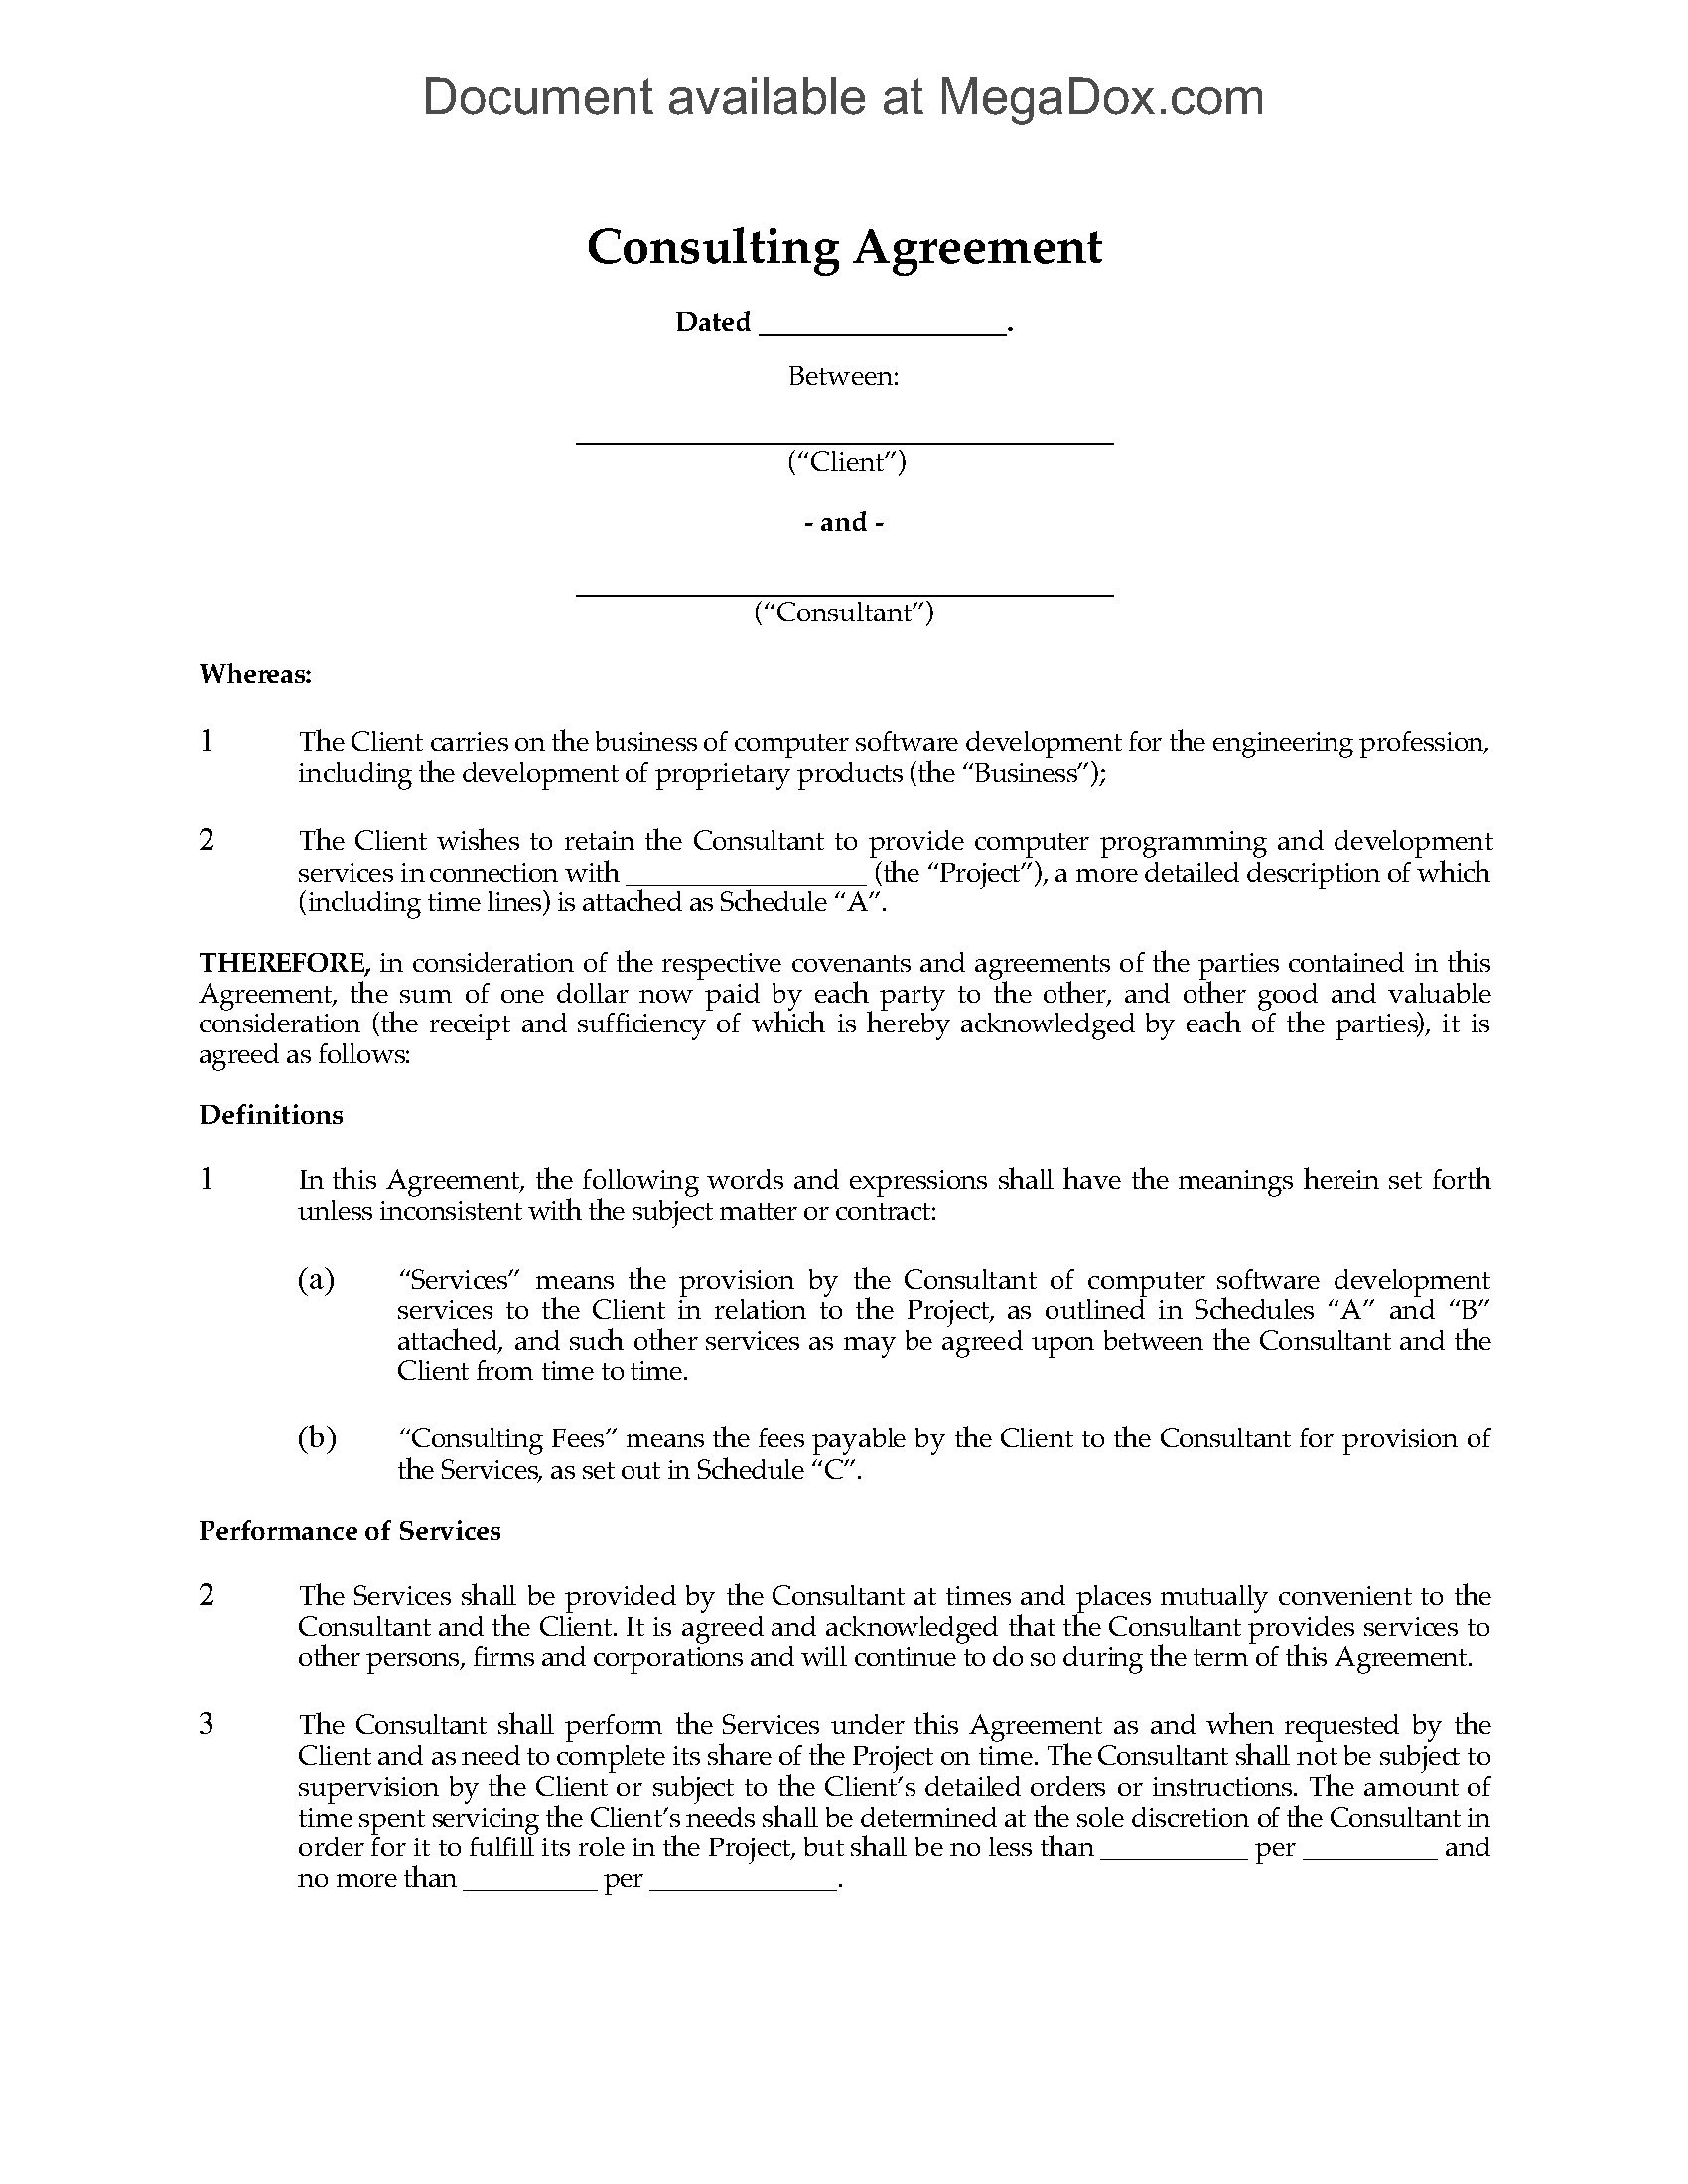 Consulting Agreement For Software Development Canada Document Contract